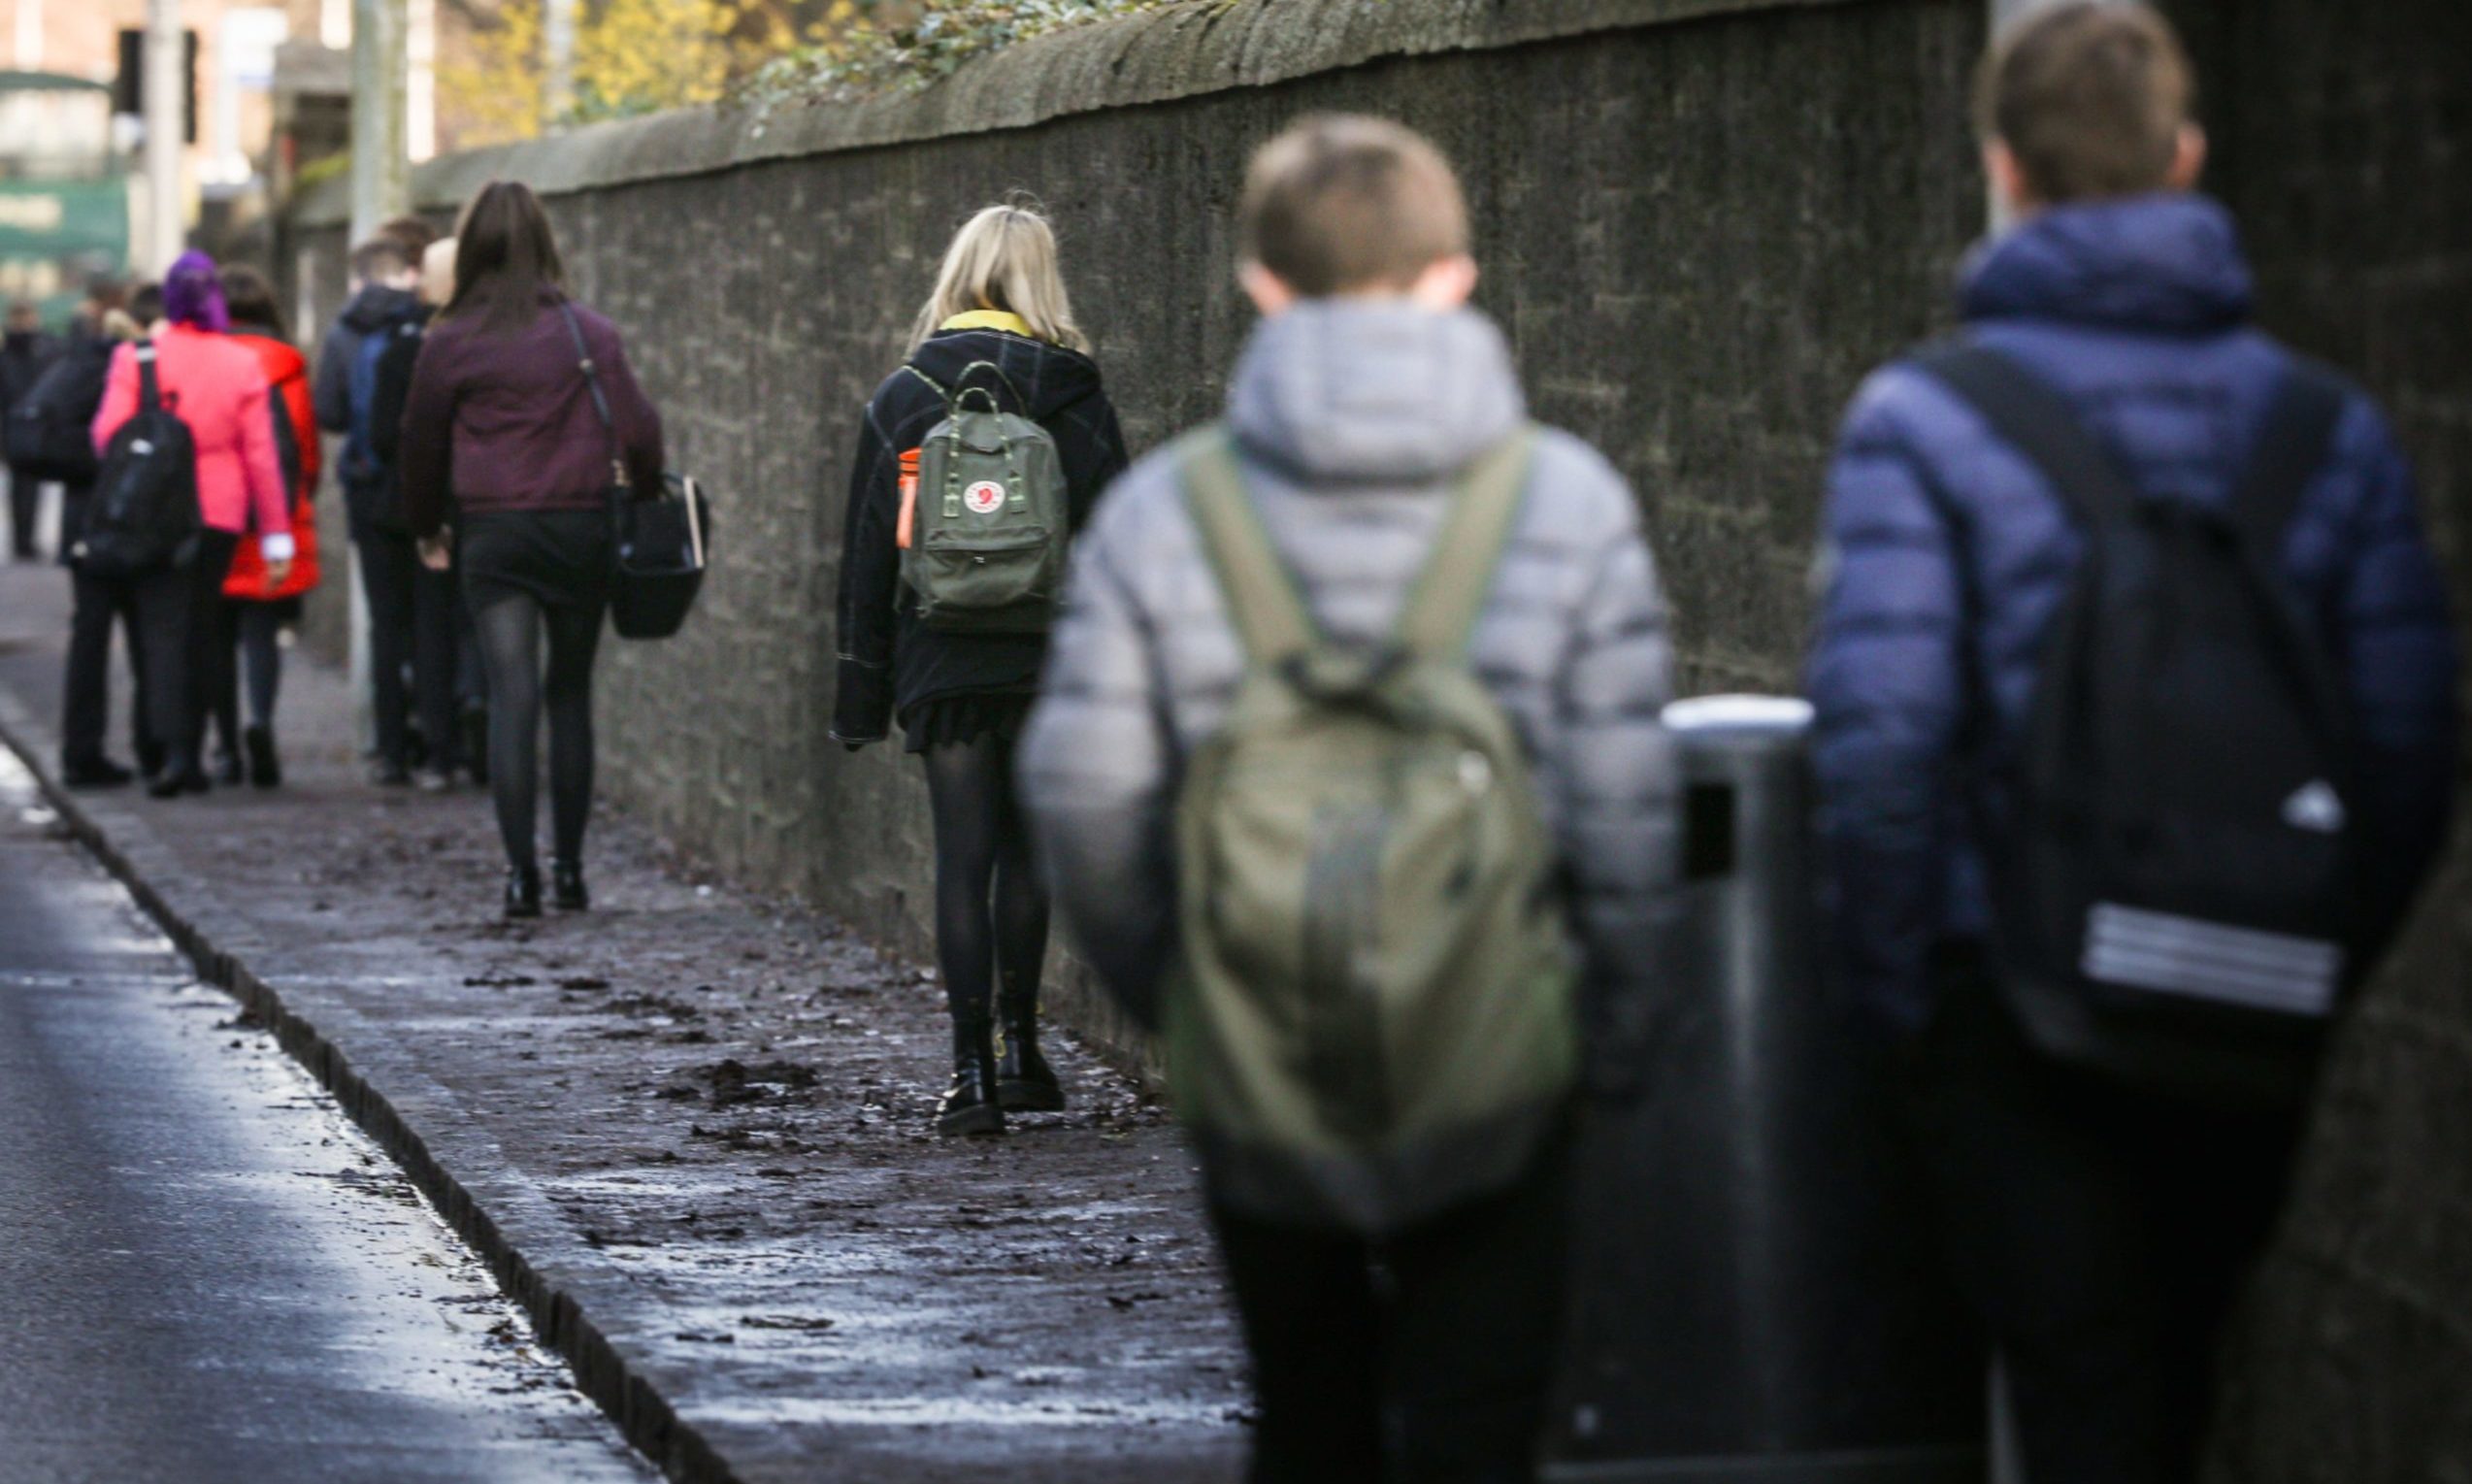 Teenagers will get extra counselling later this year